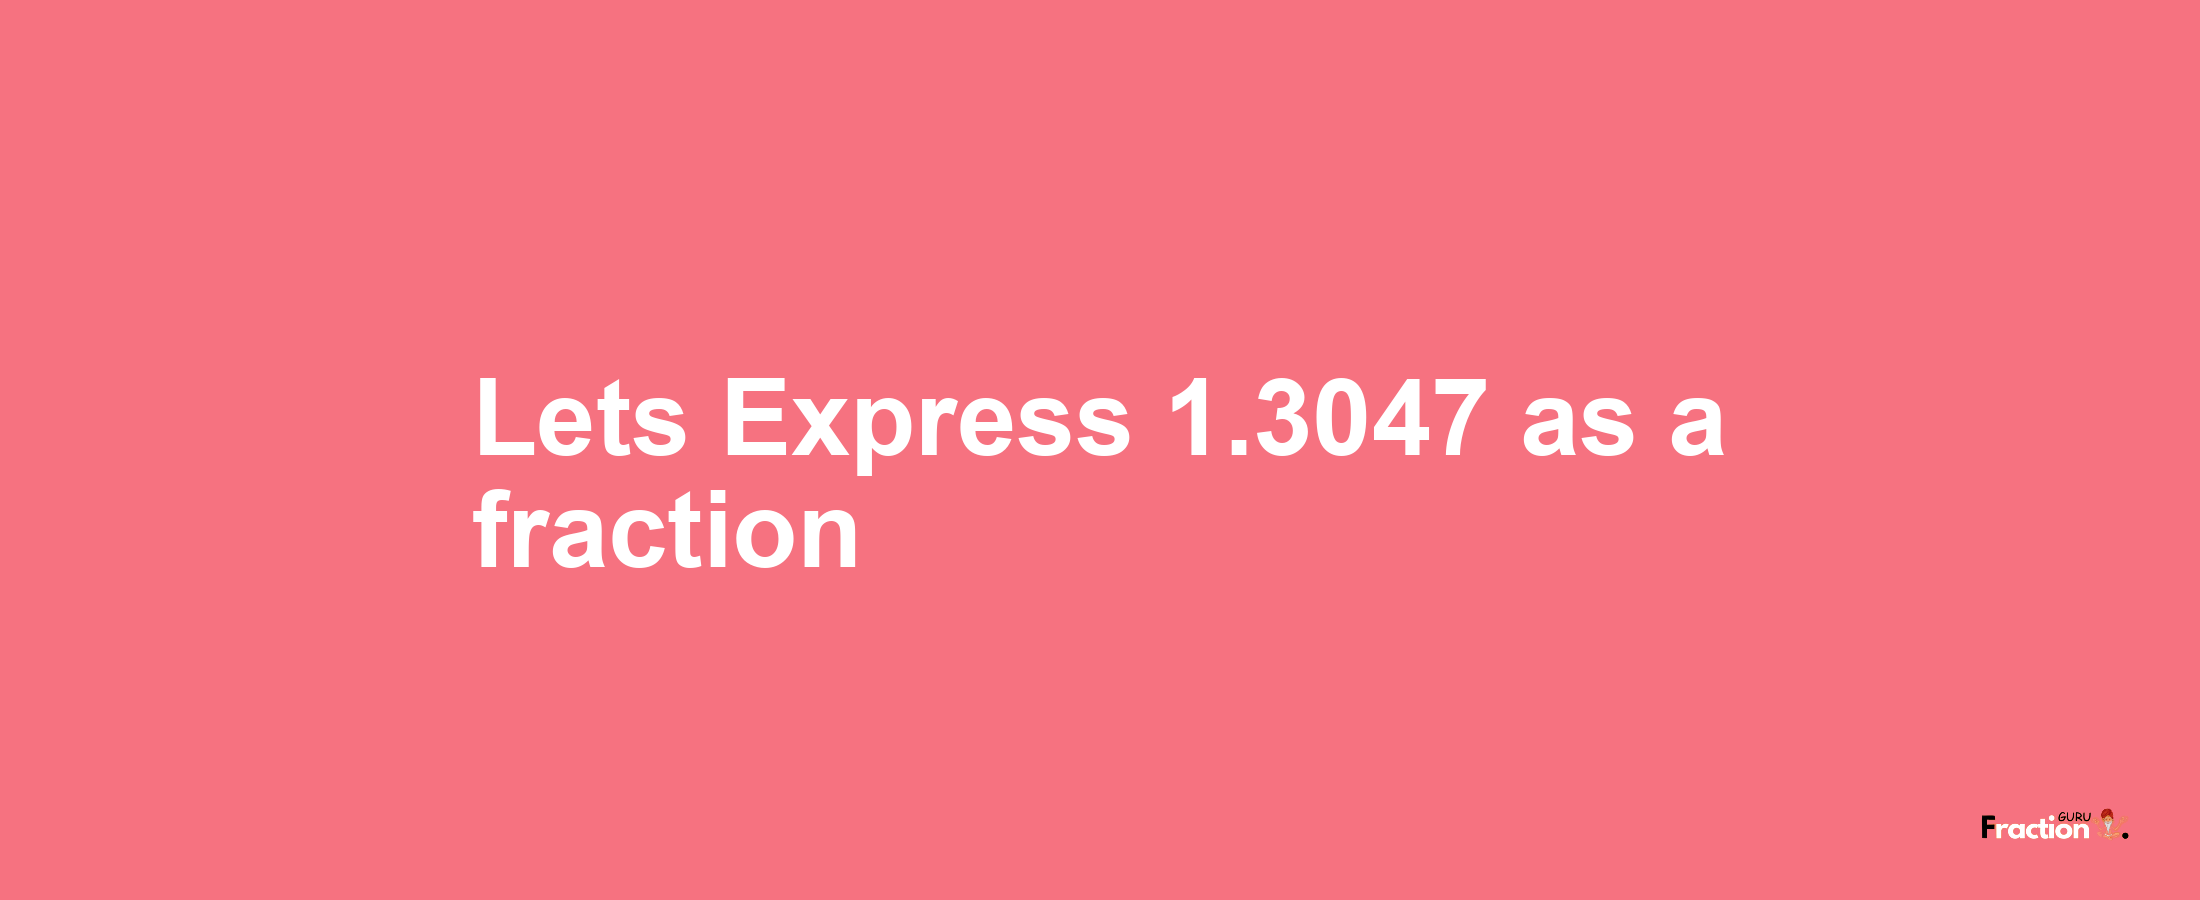 Lets Express 1.3047 as afraction